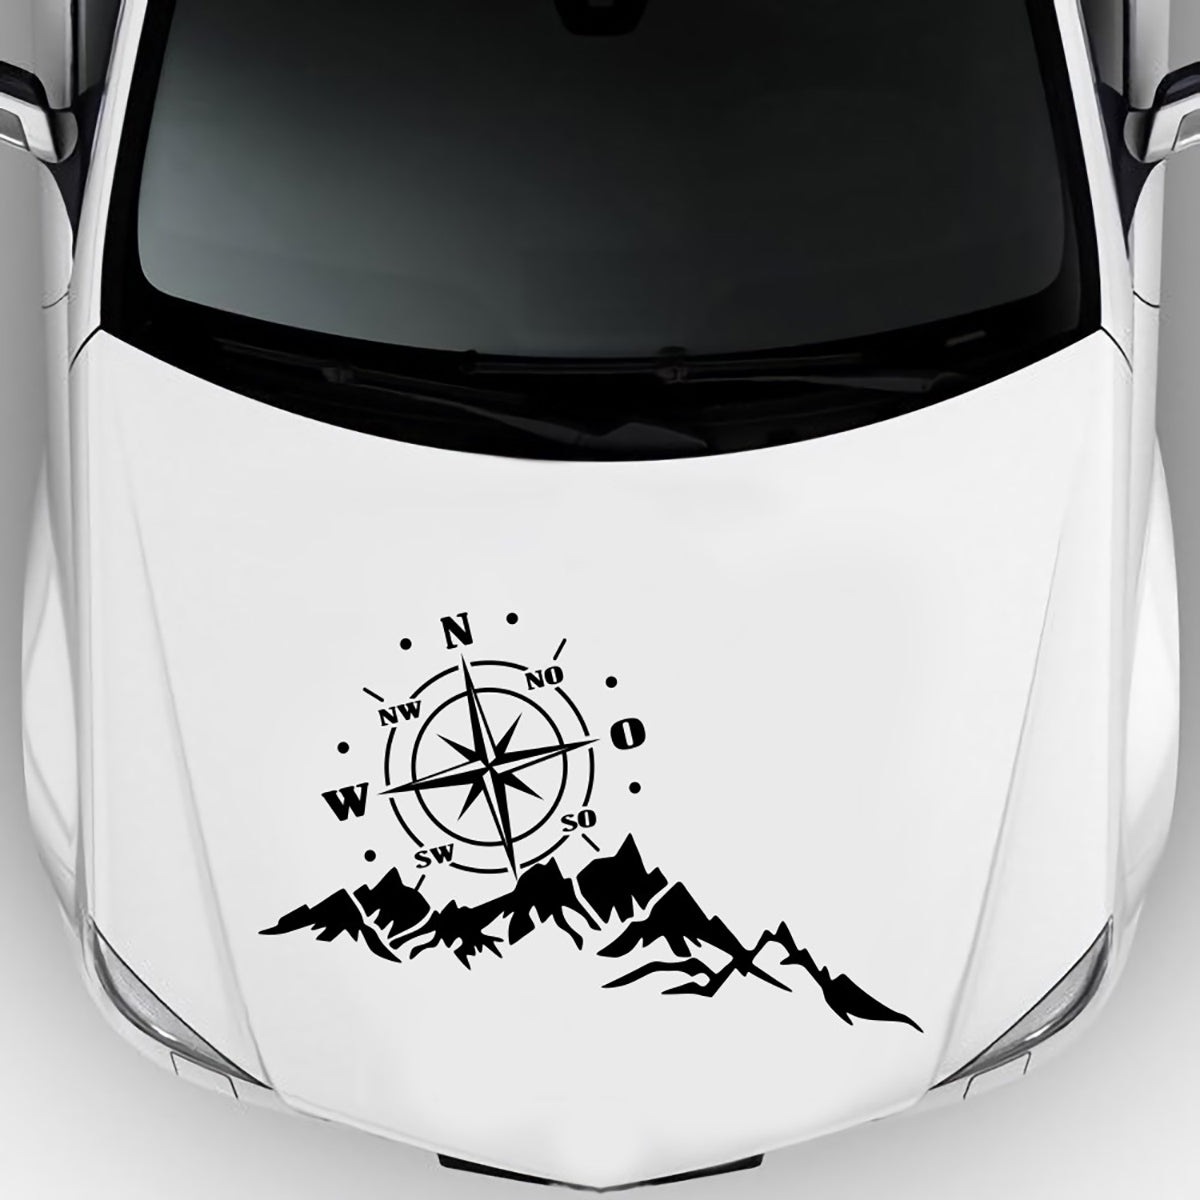 Lavender 65x35cm Sticker Body Hood Vinyl Decal Compass W/ Mountains For Camper Motorhome Boat